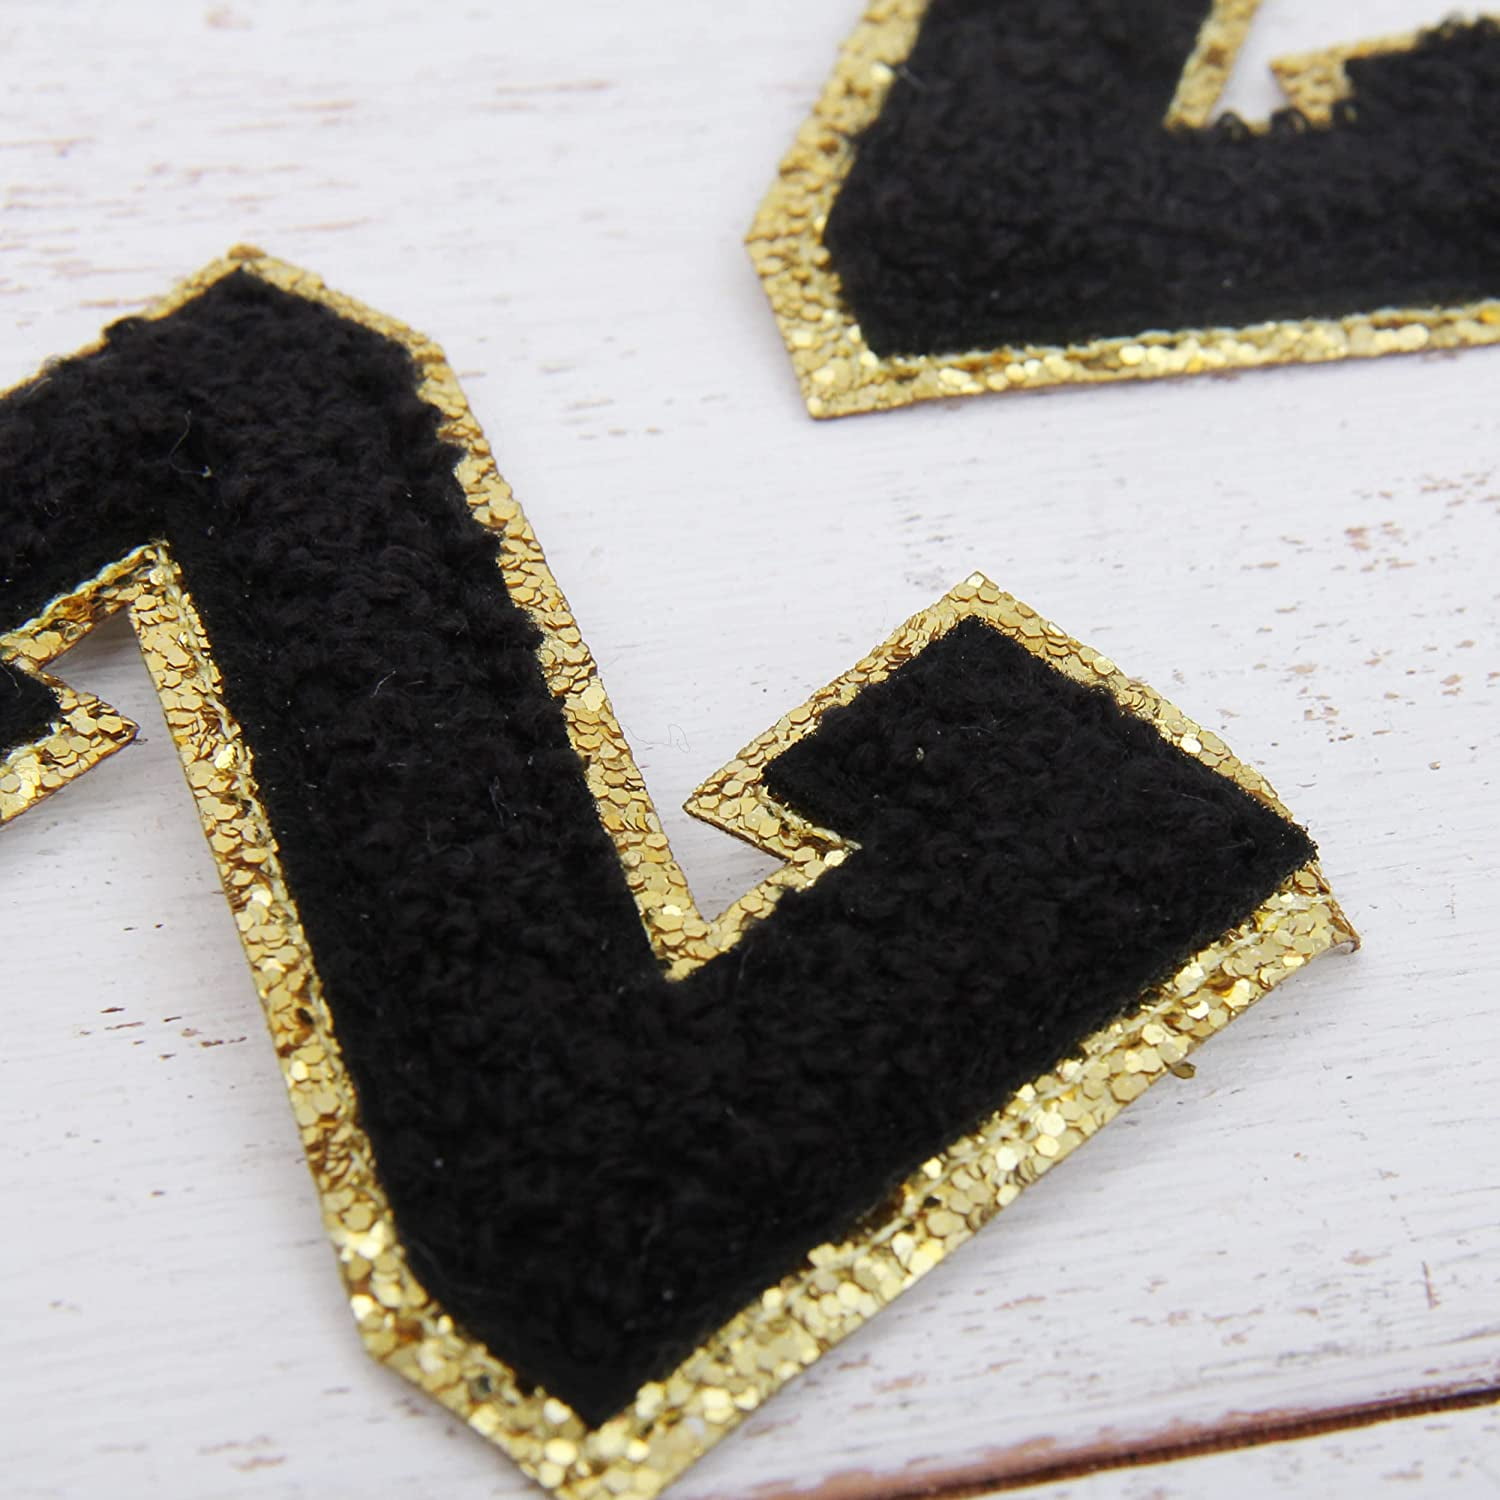 Iron on Letter Chenille Patches, 27 PCS AZ & Round Chenille Letter Patches  for Clothes,Glitter Varsity Fuzzy Patch Letter,Gold Baseball Style